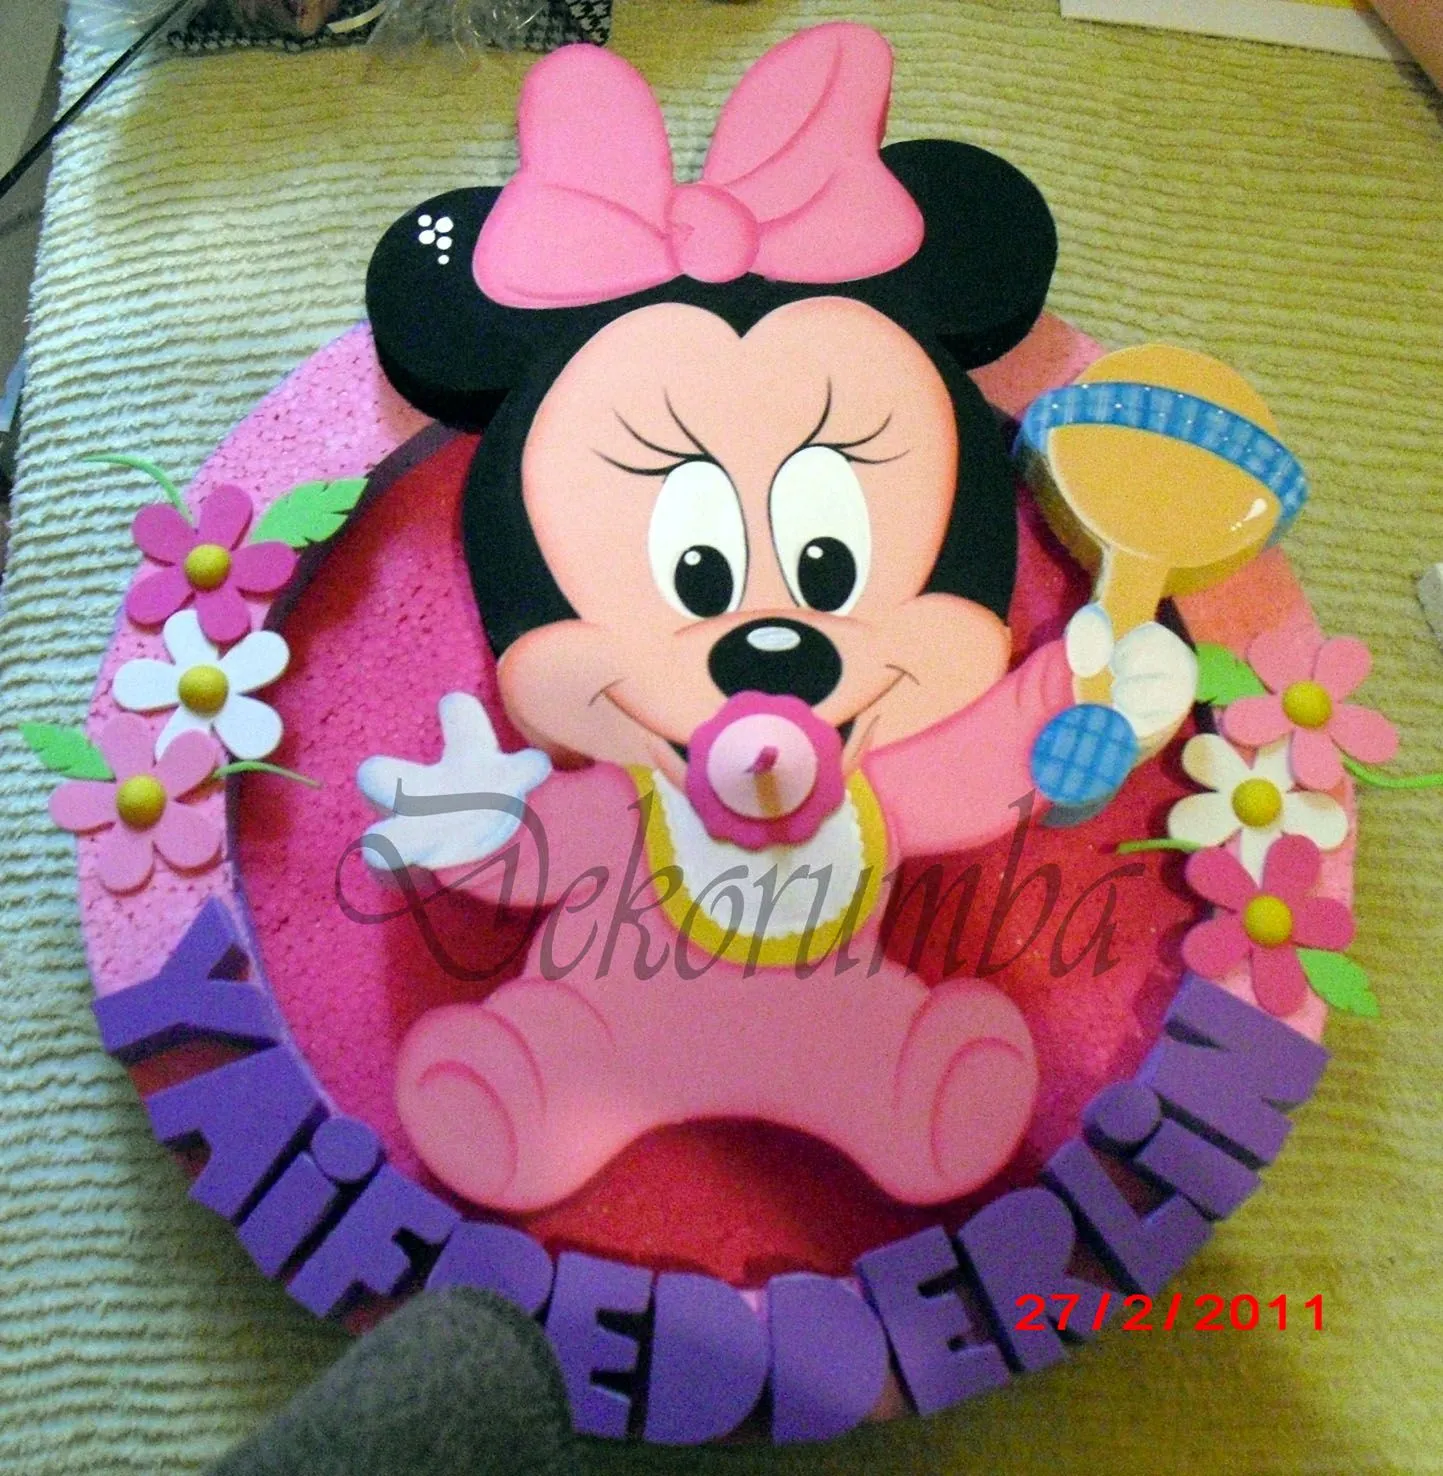 Minnie Mouse baby chupetera - Imagui